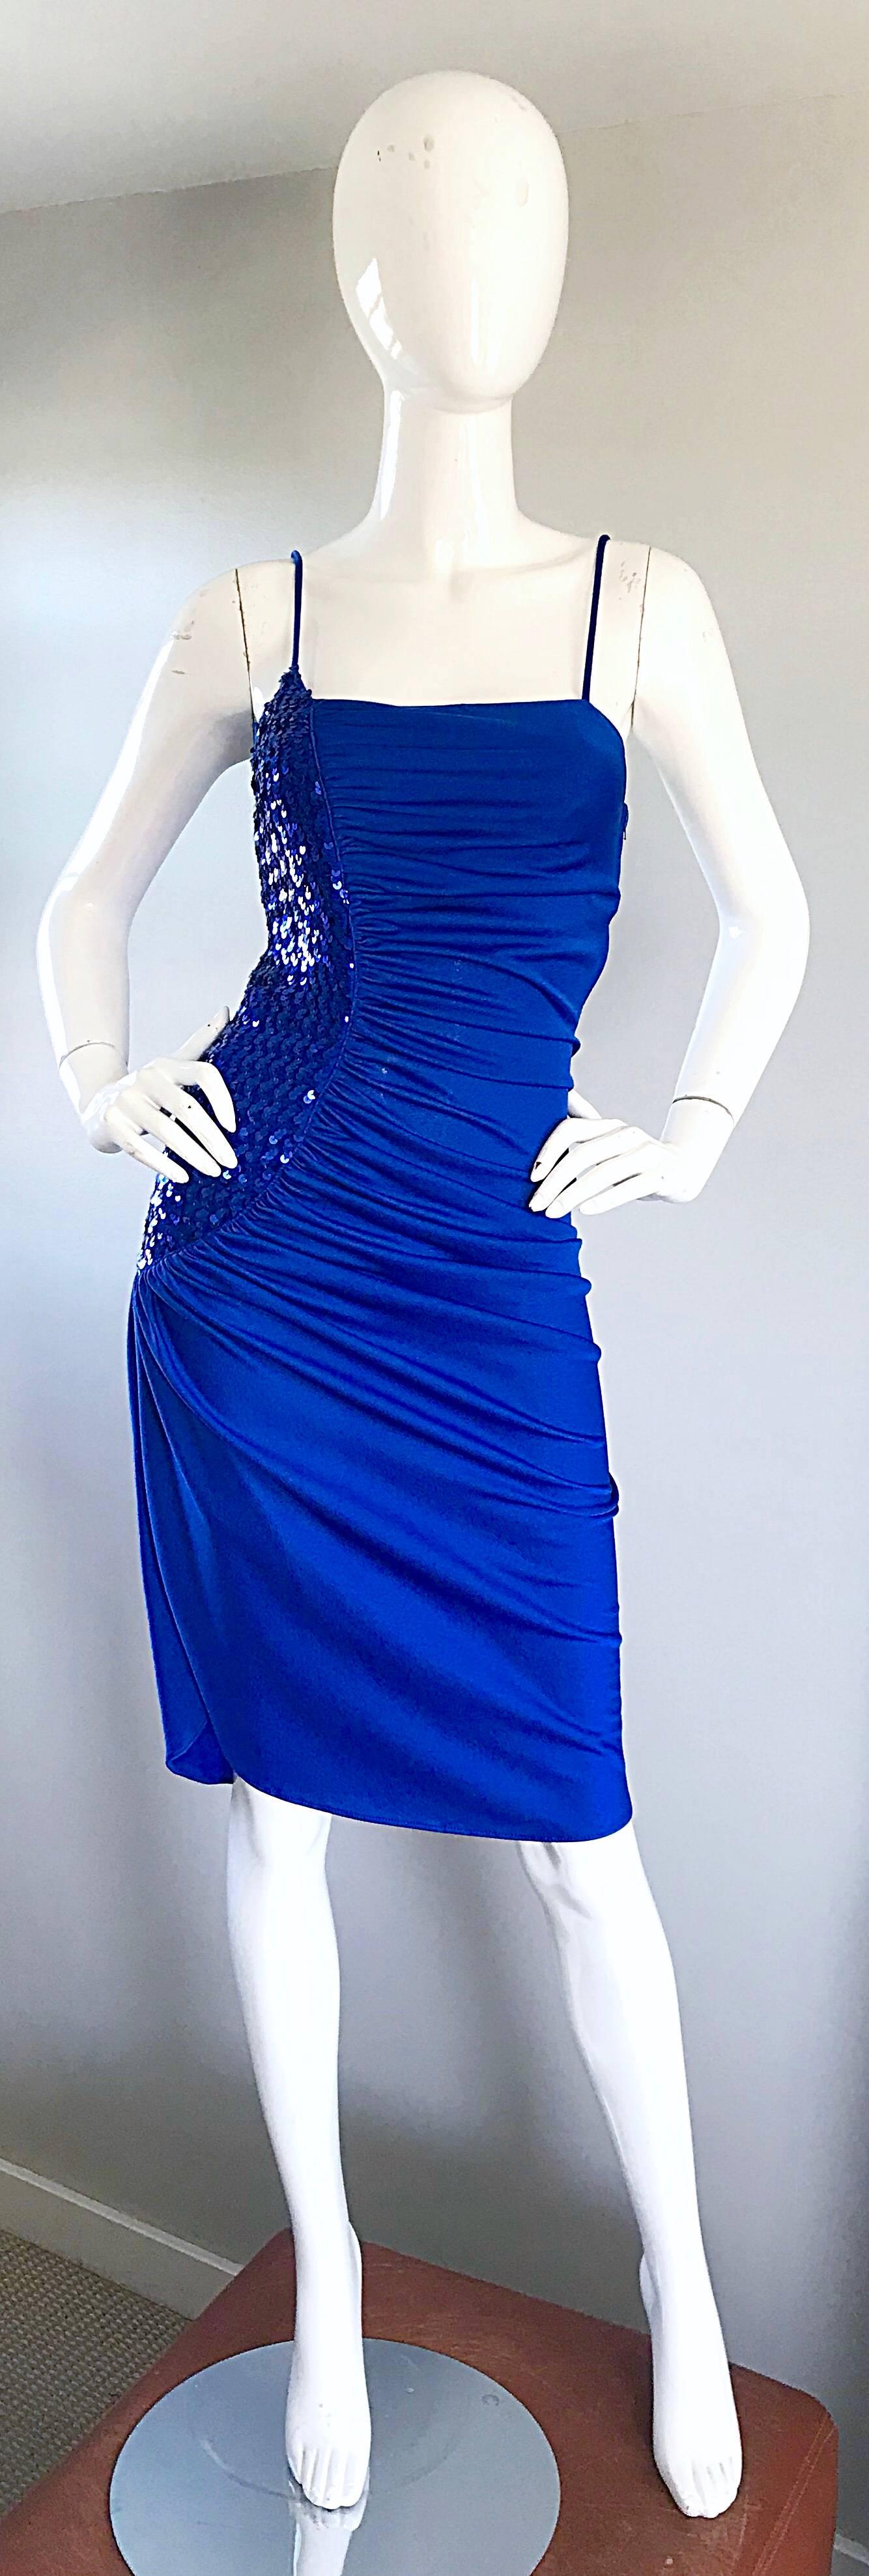 Sexy early 1980s SAMIR royal blue jersey and sequined Studio 54 disco dress! Features a slinky jersey fabric with hundreds of hand-sewn sequins on the right side. Hidden zipper up the side. Stretches to fit. Insanely flattering, and a definite head